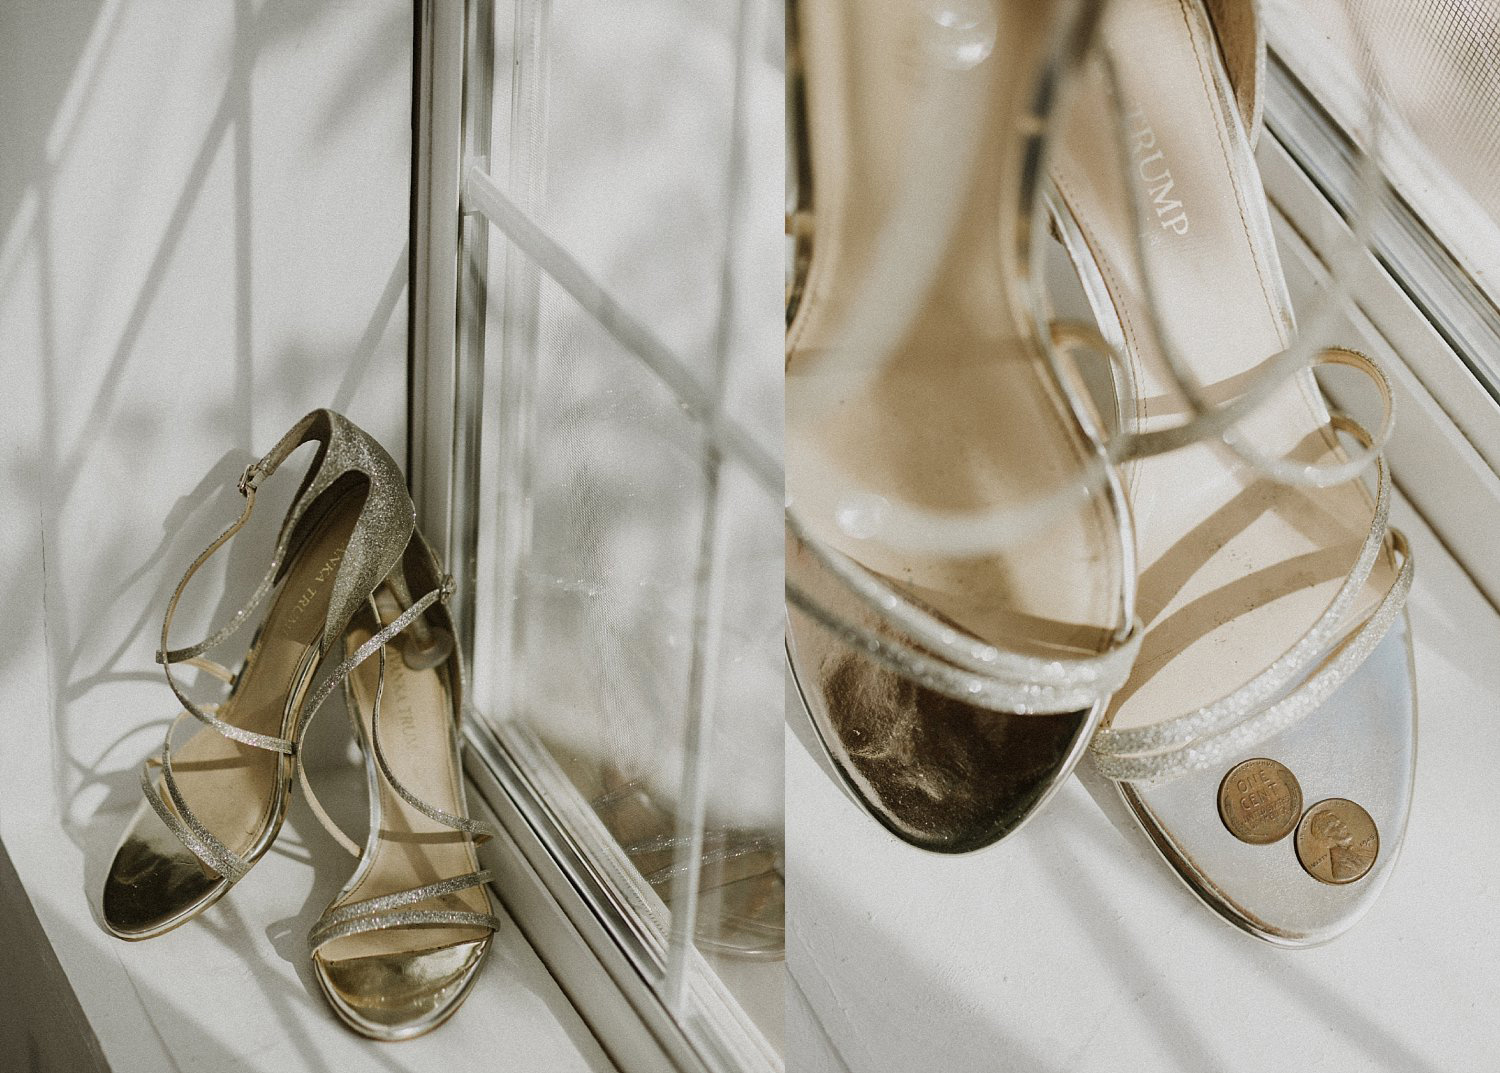 Nude wedding shoes with penny in shoe